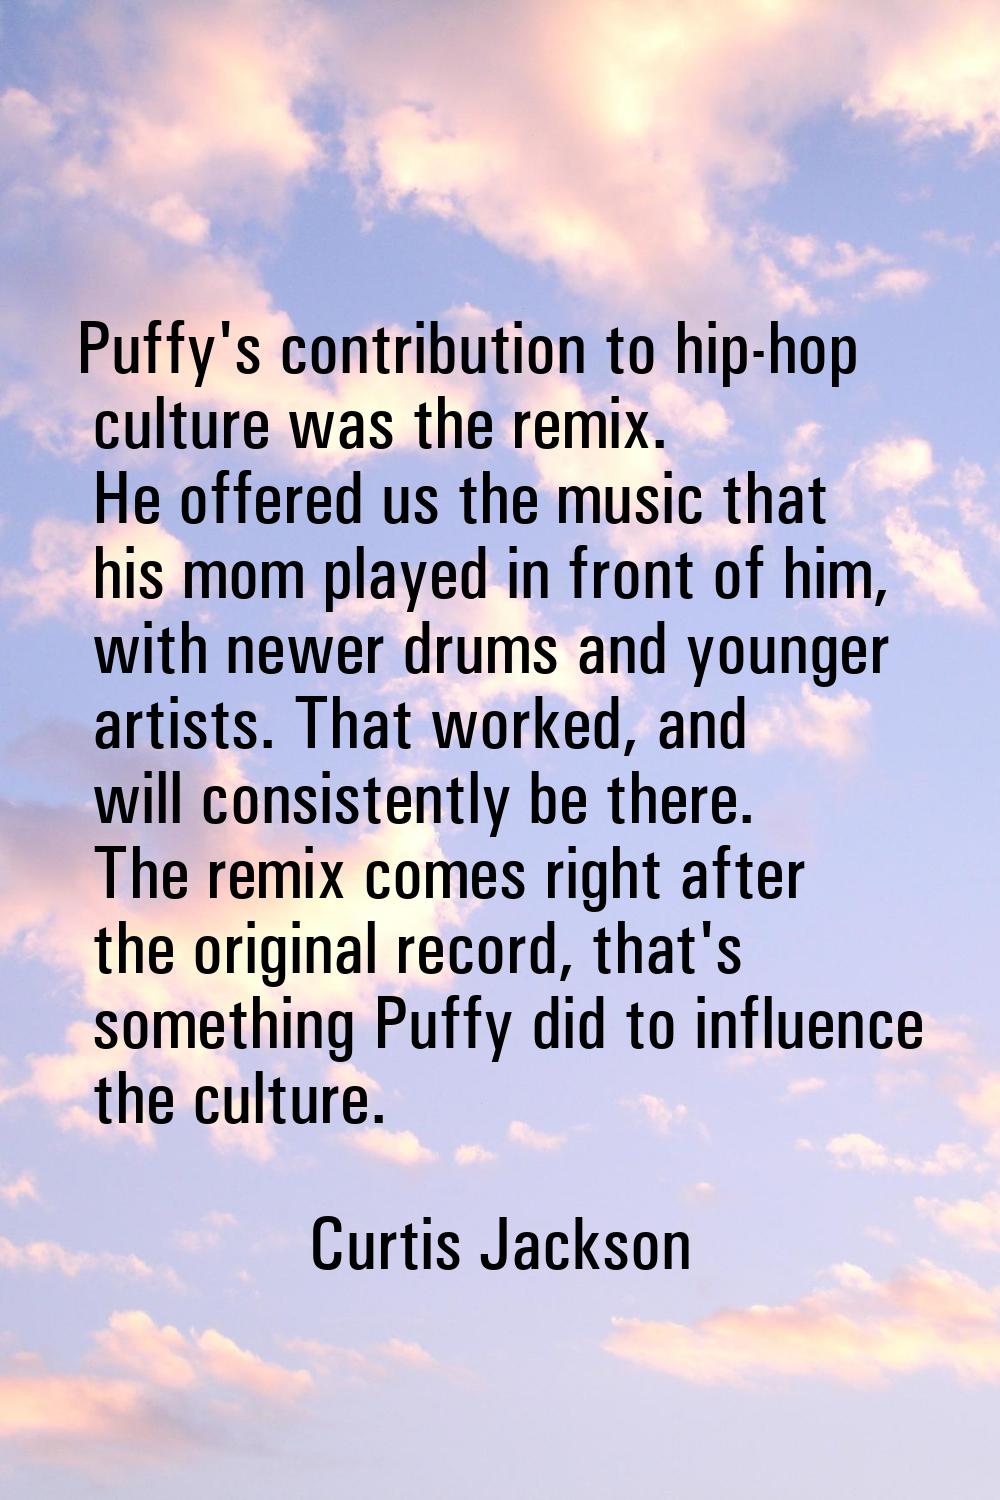 Puffy's contribution to hip-hop culture was the remix. He offered us the music that his mom played 